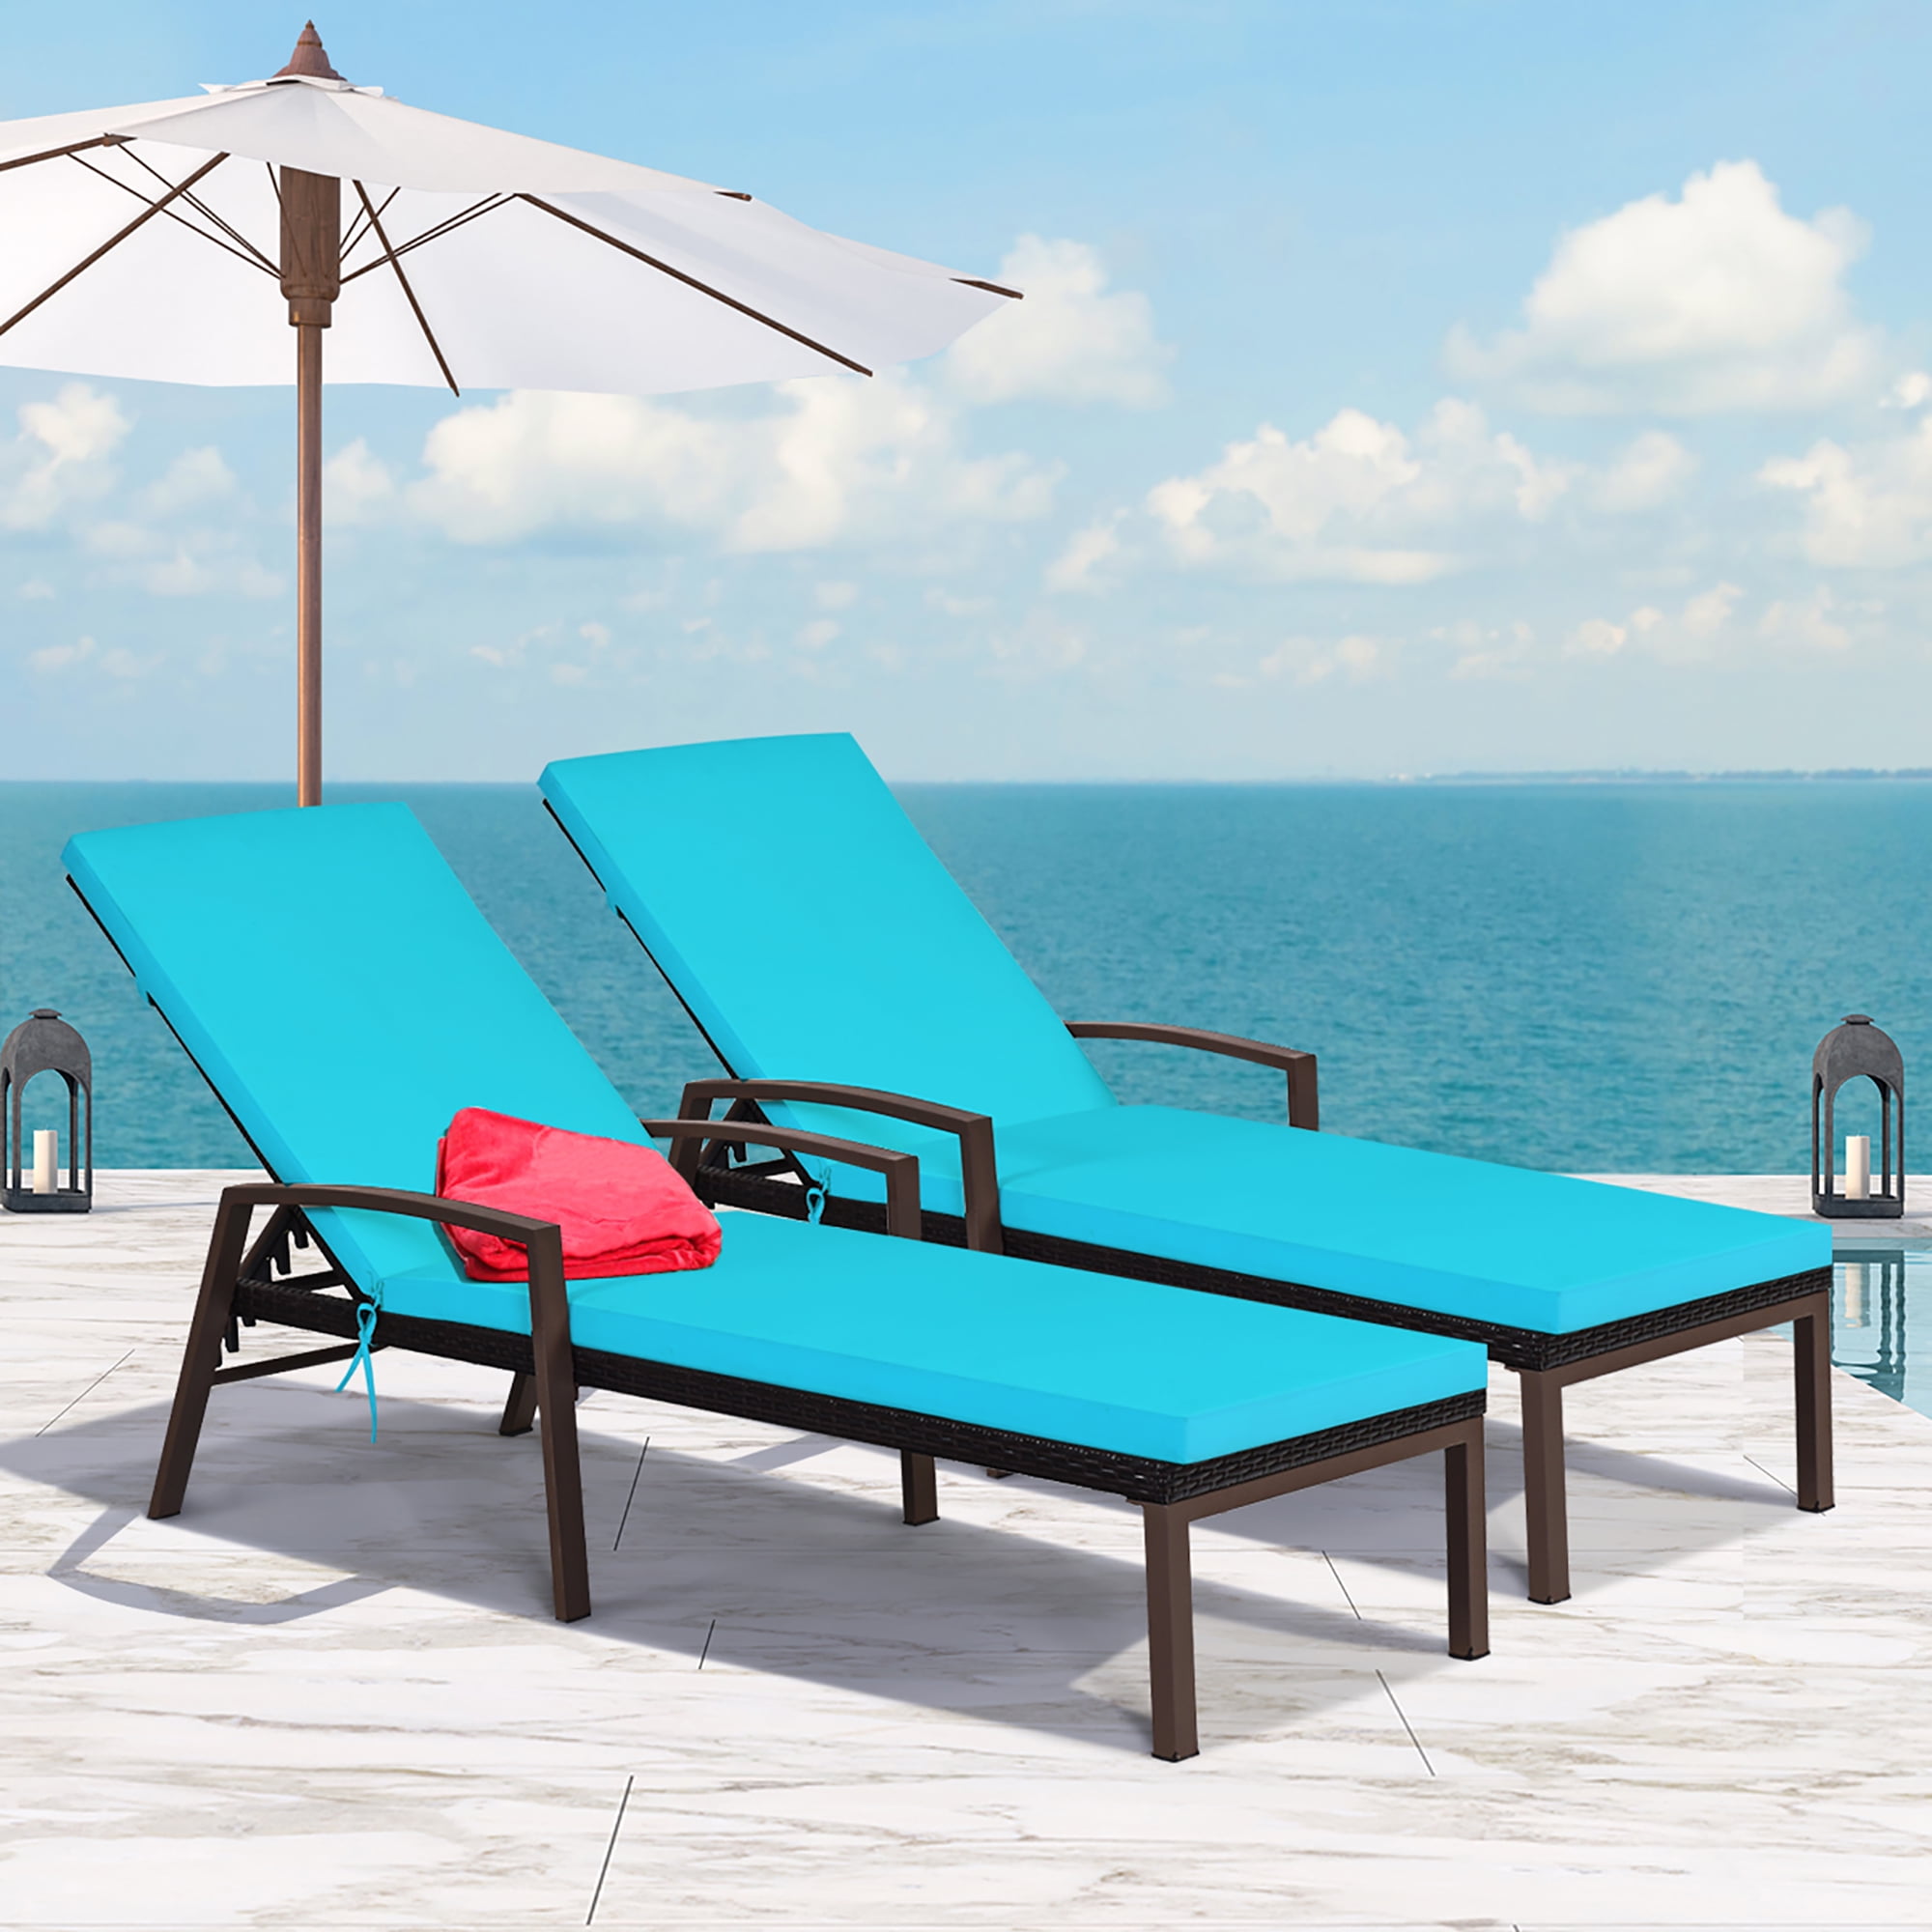 Pool Balcony Furniture Turquoise HTTH 2pcs Rattan Chaise Lounge Outdoor Patio Chairs All-Weather Sun Chaise Lounge Furniture for Backyard